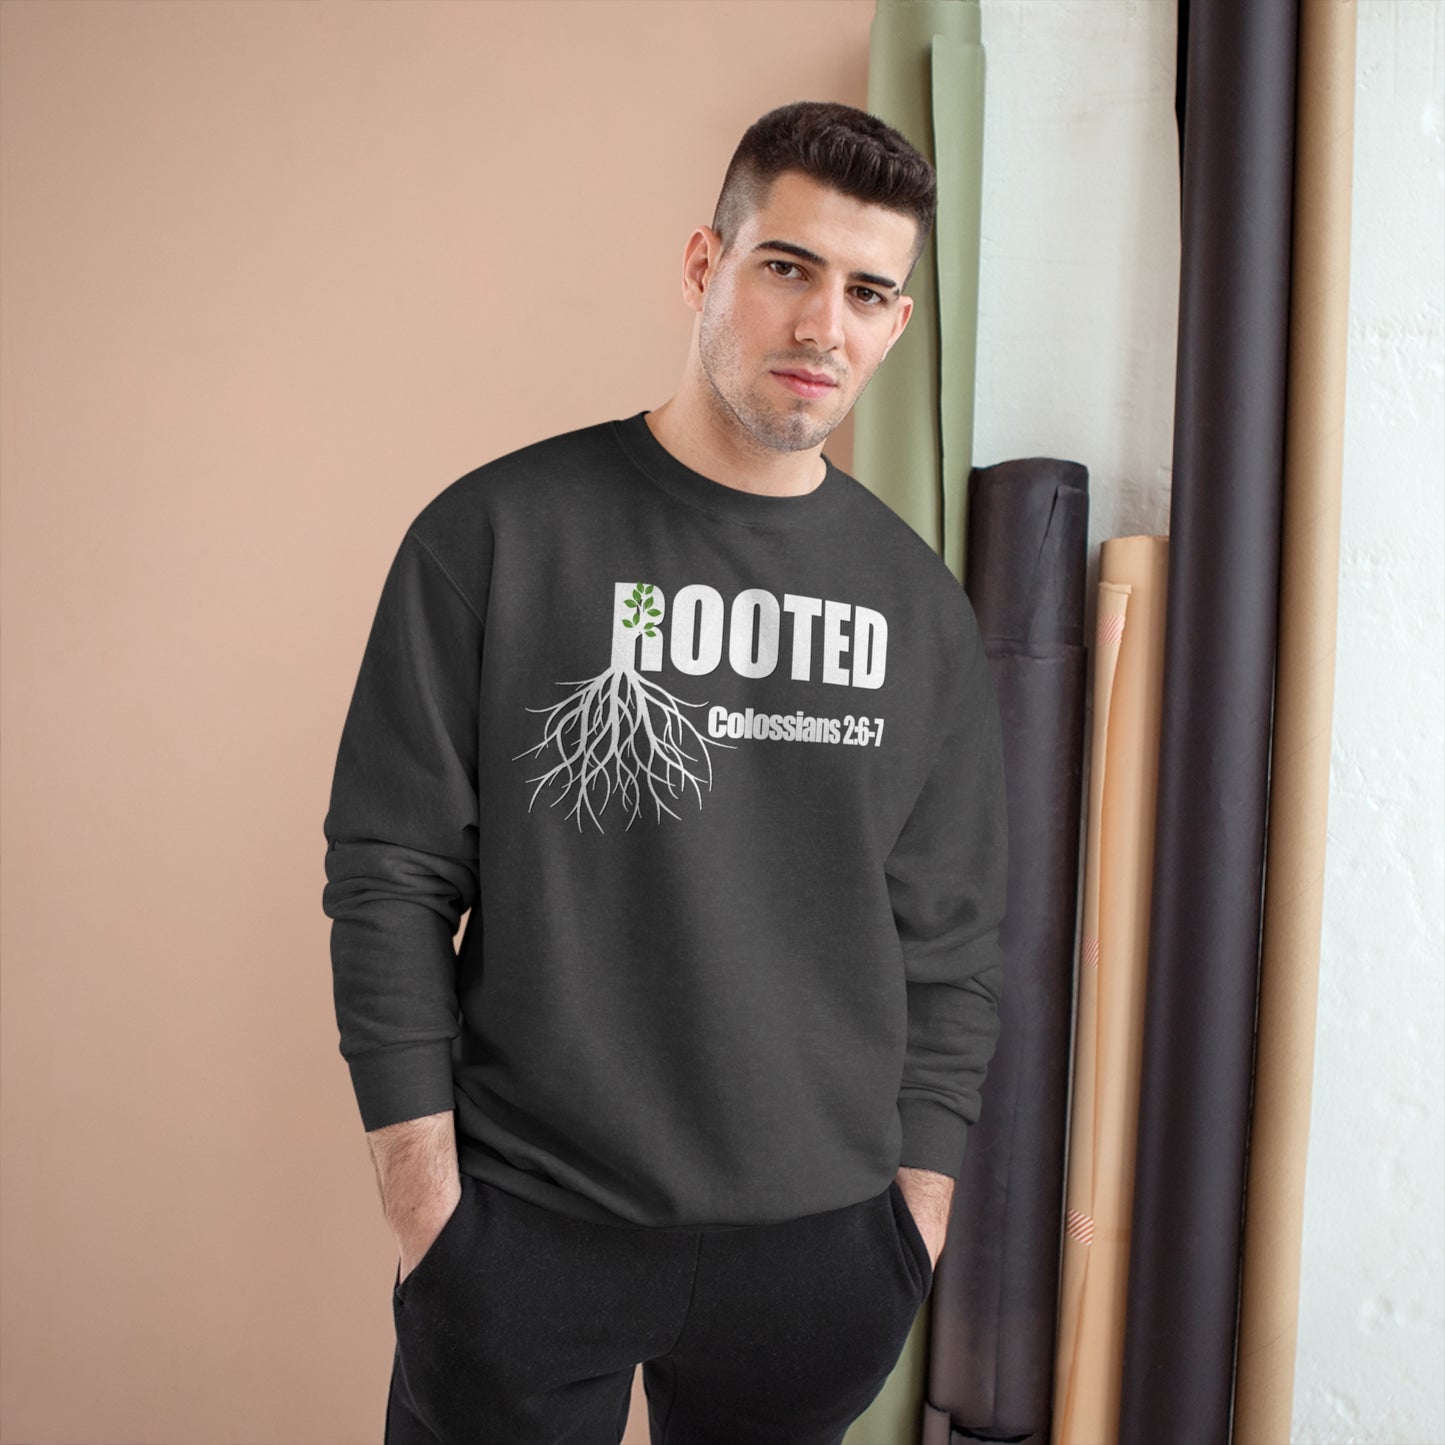 Colossians 2:7 Rooted Sweatshirt